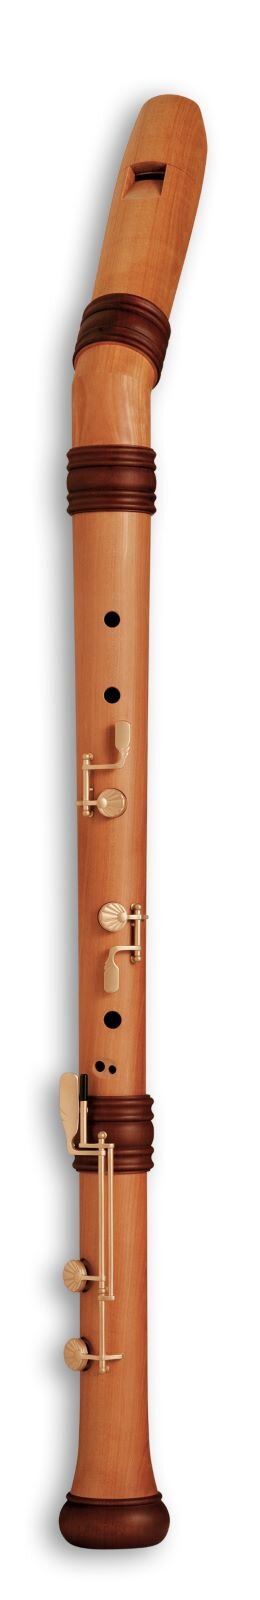 Mollenhauer Dream Flute Bass Angled Pear Tree Nature Double Hole with Double Key (4527K) : photo 1